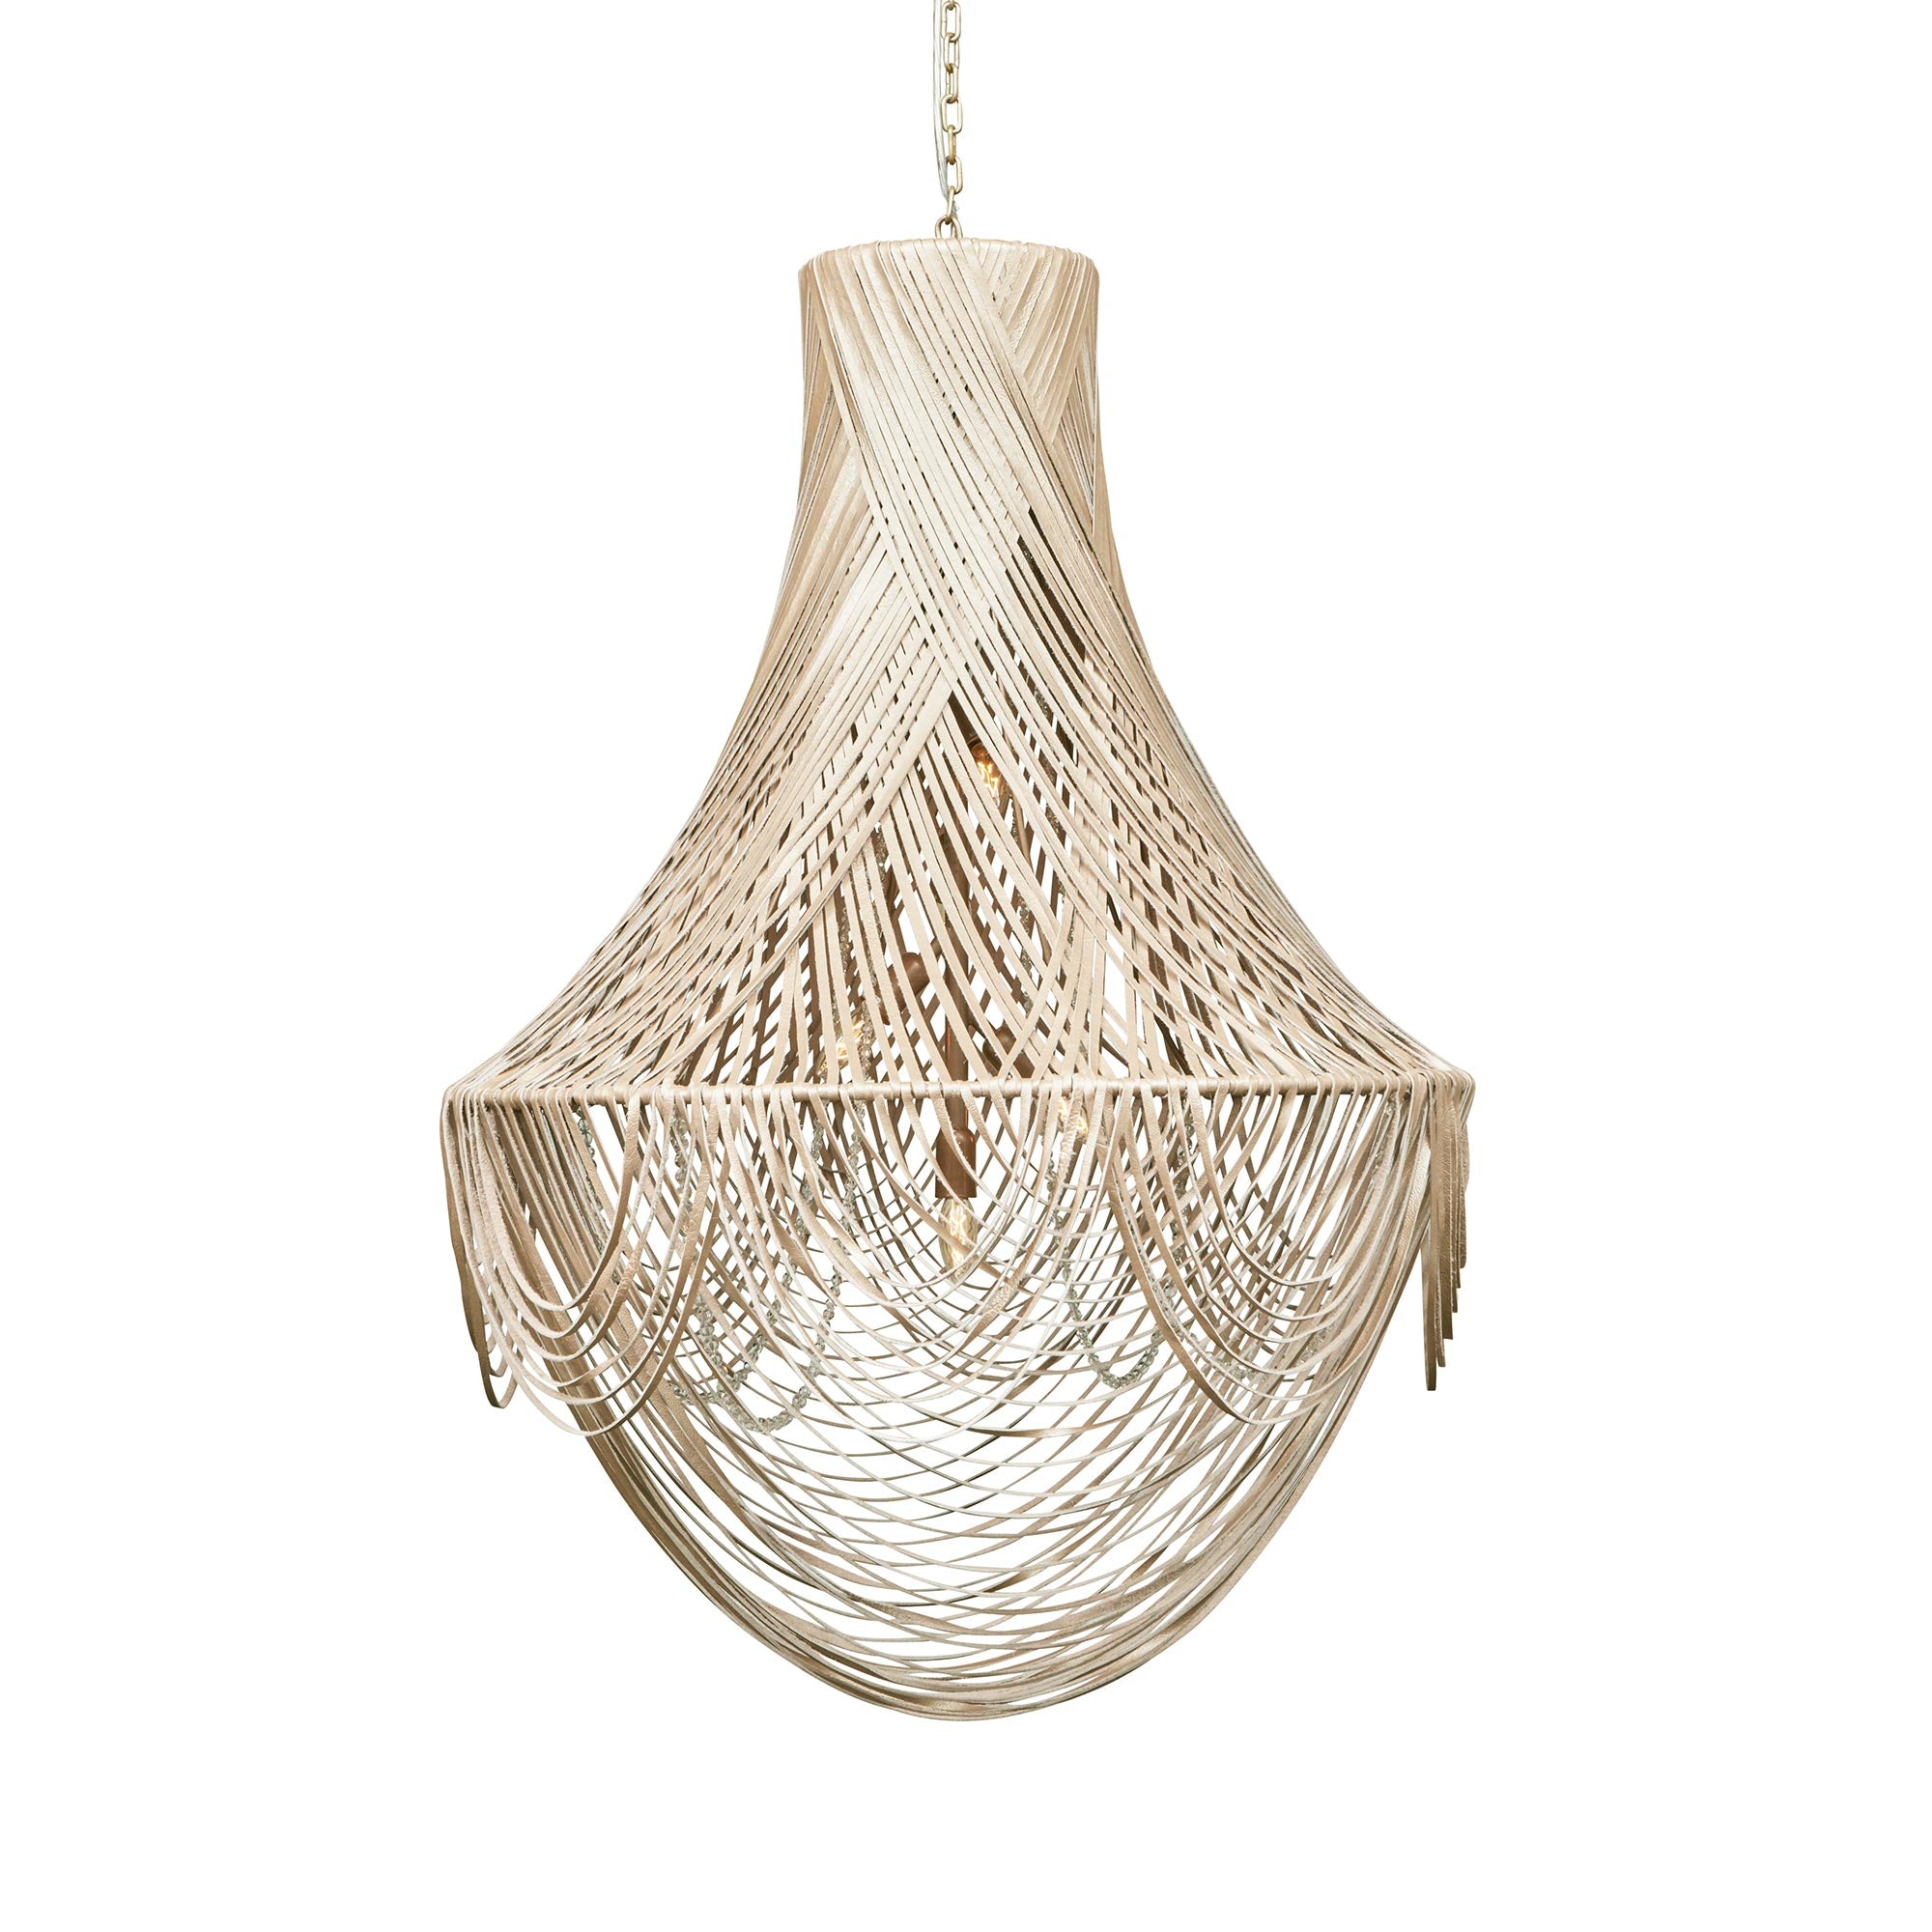 Large Empire Leather Chandelier in Cream-Stone Leather